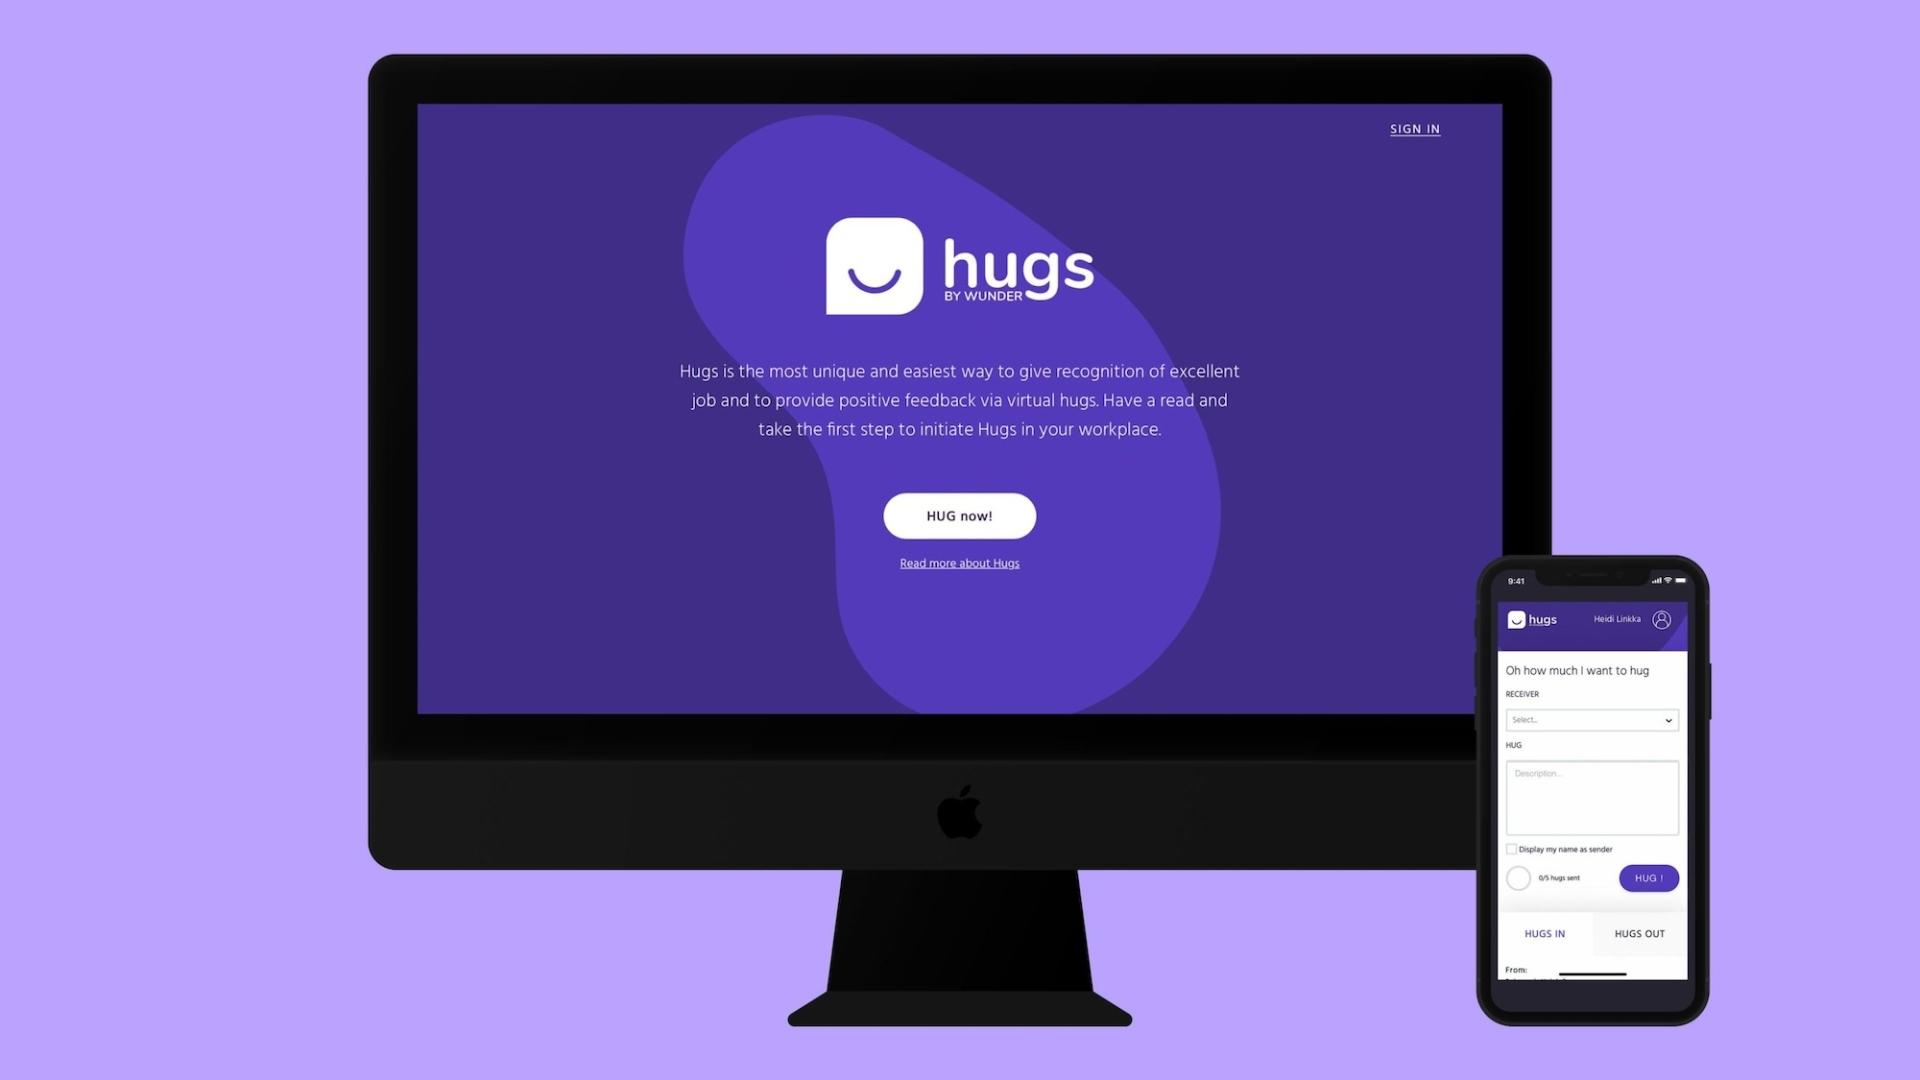 Hugs by Wunder, on desktop and mobile screen.